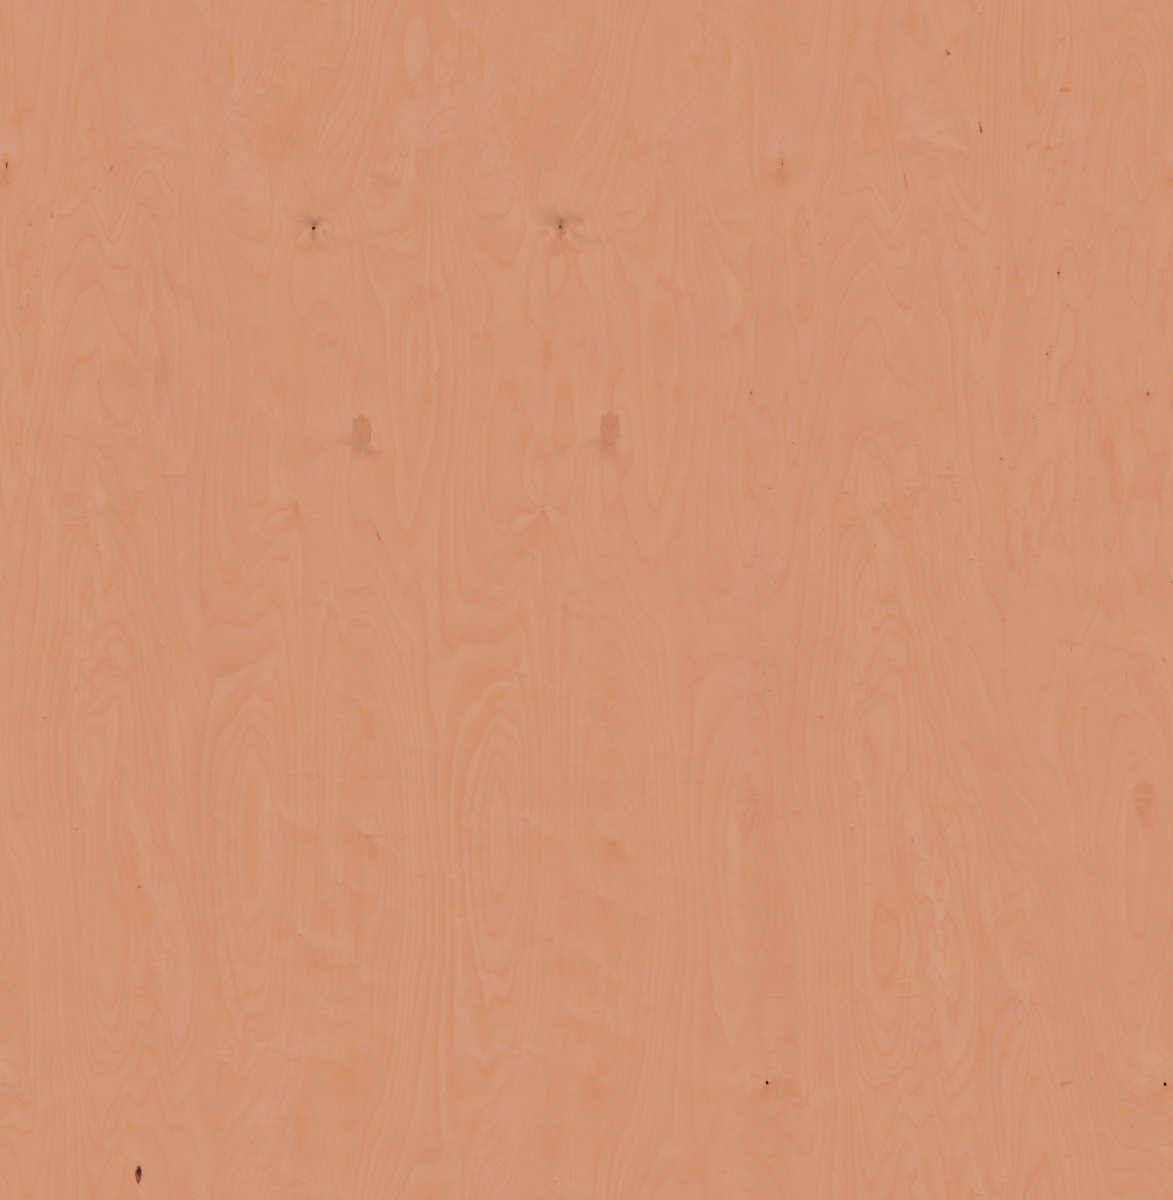 A seamless wood texture with birch plywood boards arranged in a None pattern